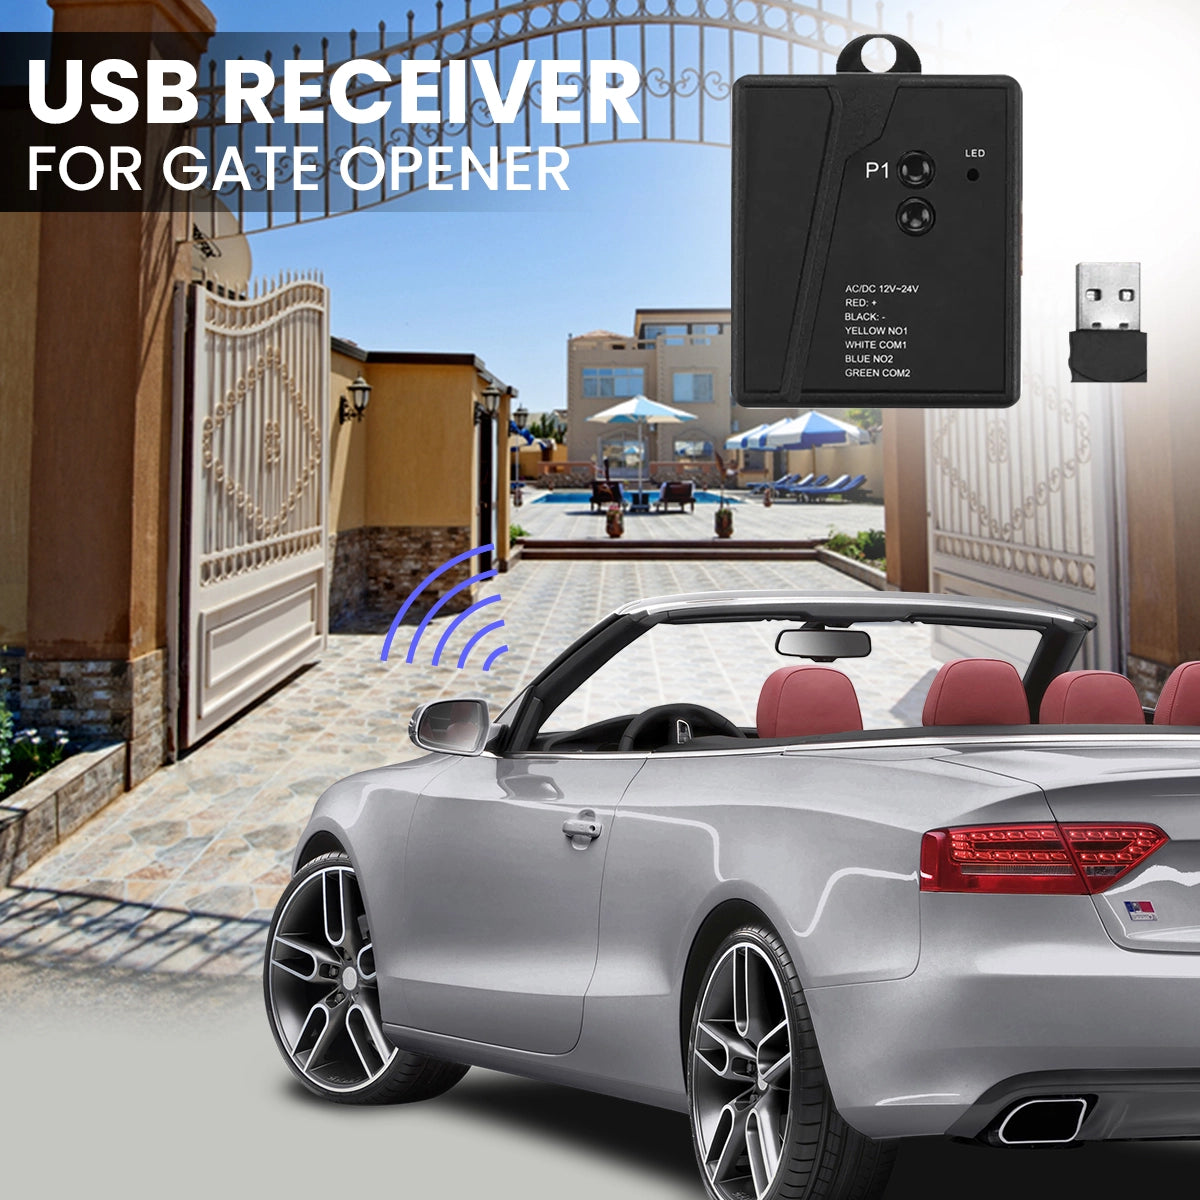 USB-Receiver -for -Gate -Opener